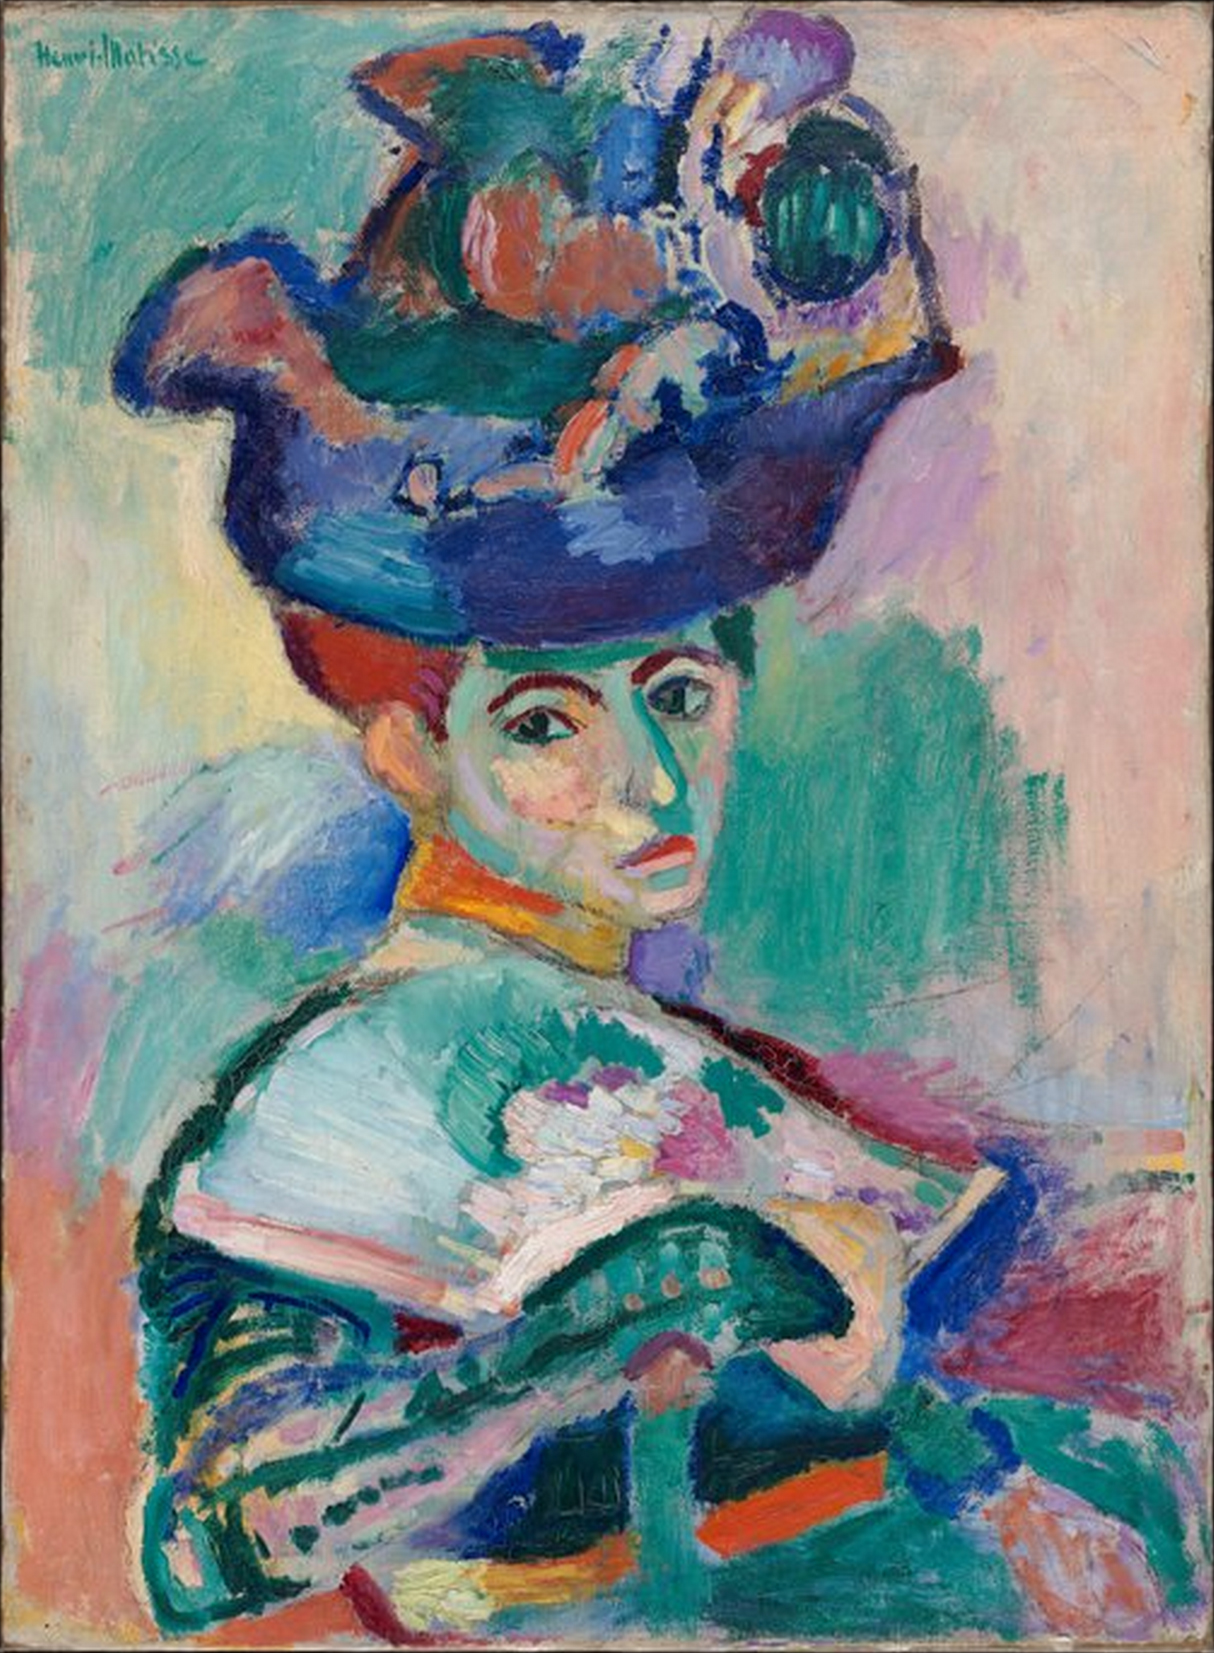 Matisse, Woman with a Hat, 1905